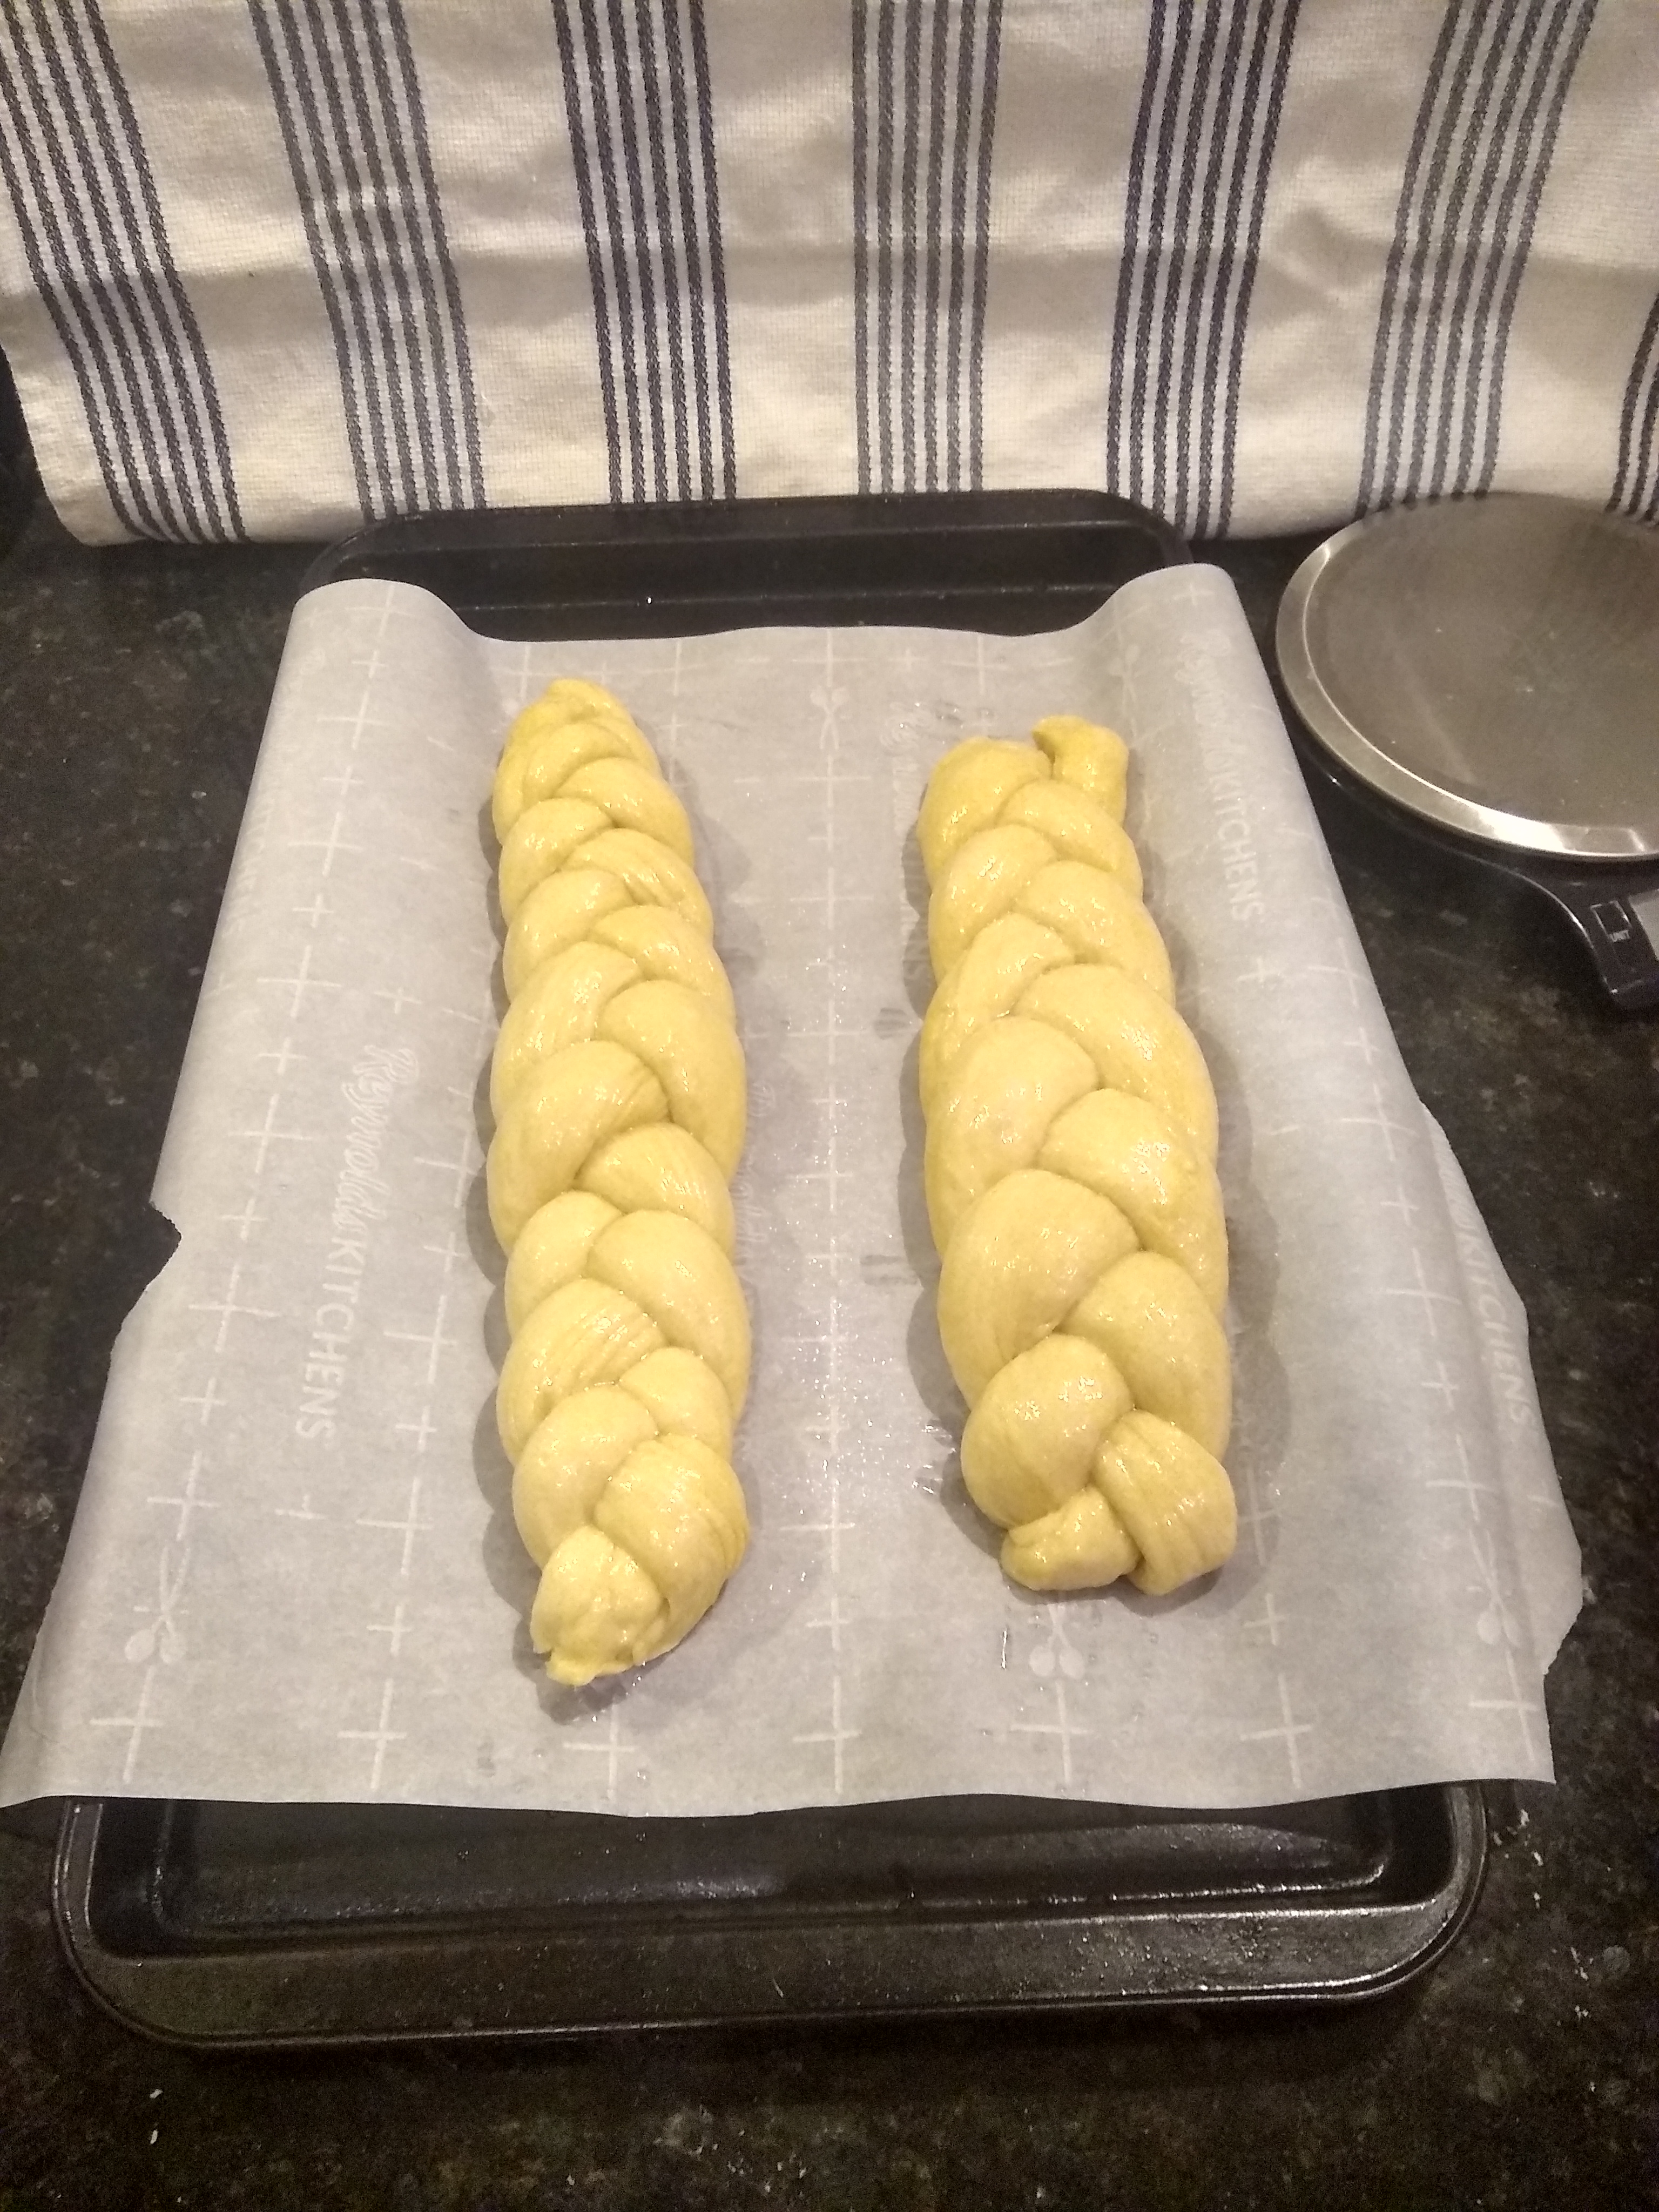 Challah loaves on a baking tray